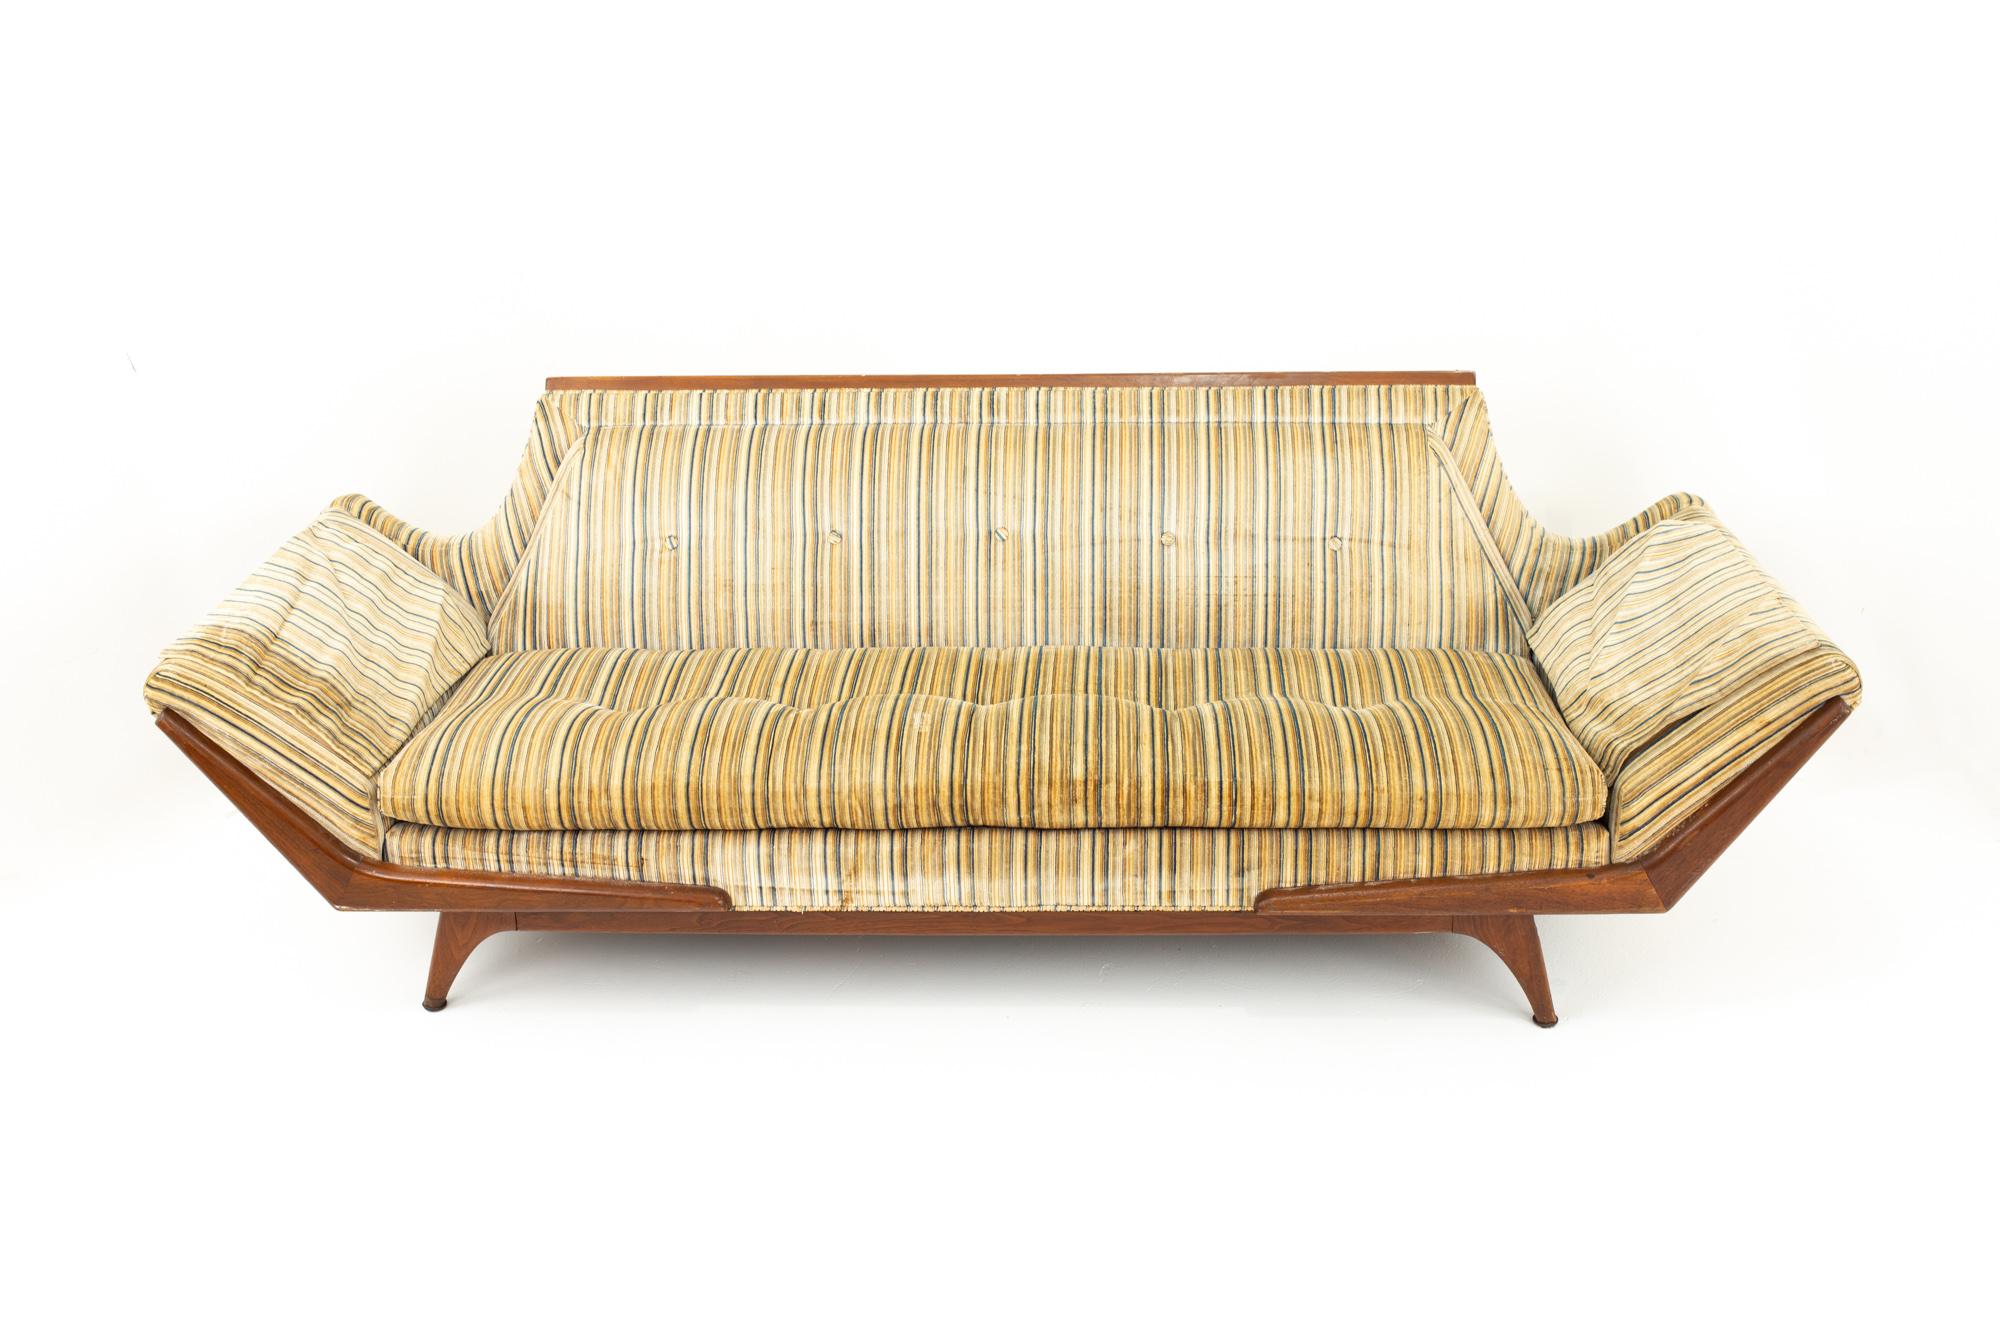 Adrian Pearsall midcentury Gondola sofa
Sofa measures: 97.5 wide x 32 deep x 30 high, with a seat height of 17 inches

All pieces of furniture can be had in what we call restored vintage condition. That means the piece is restored upon purchase